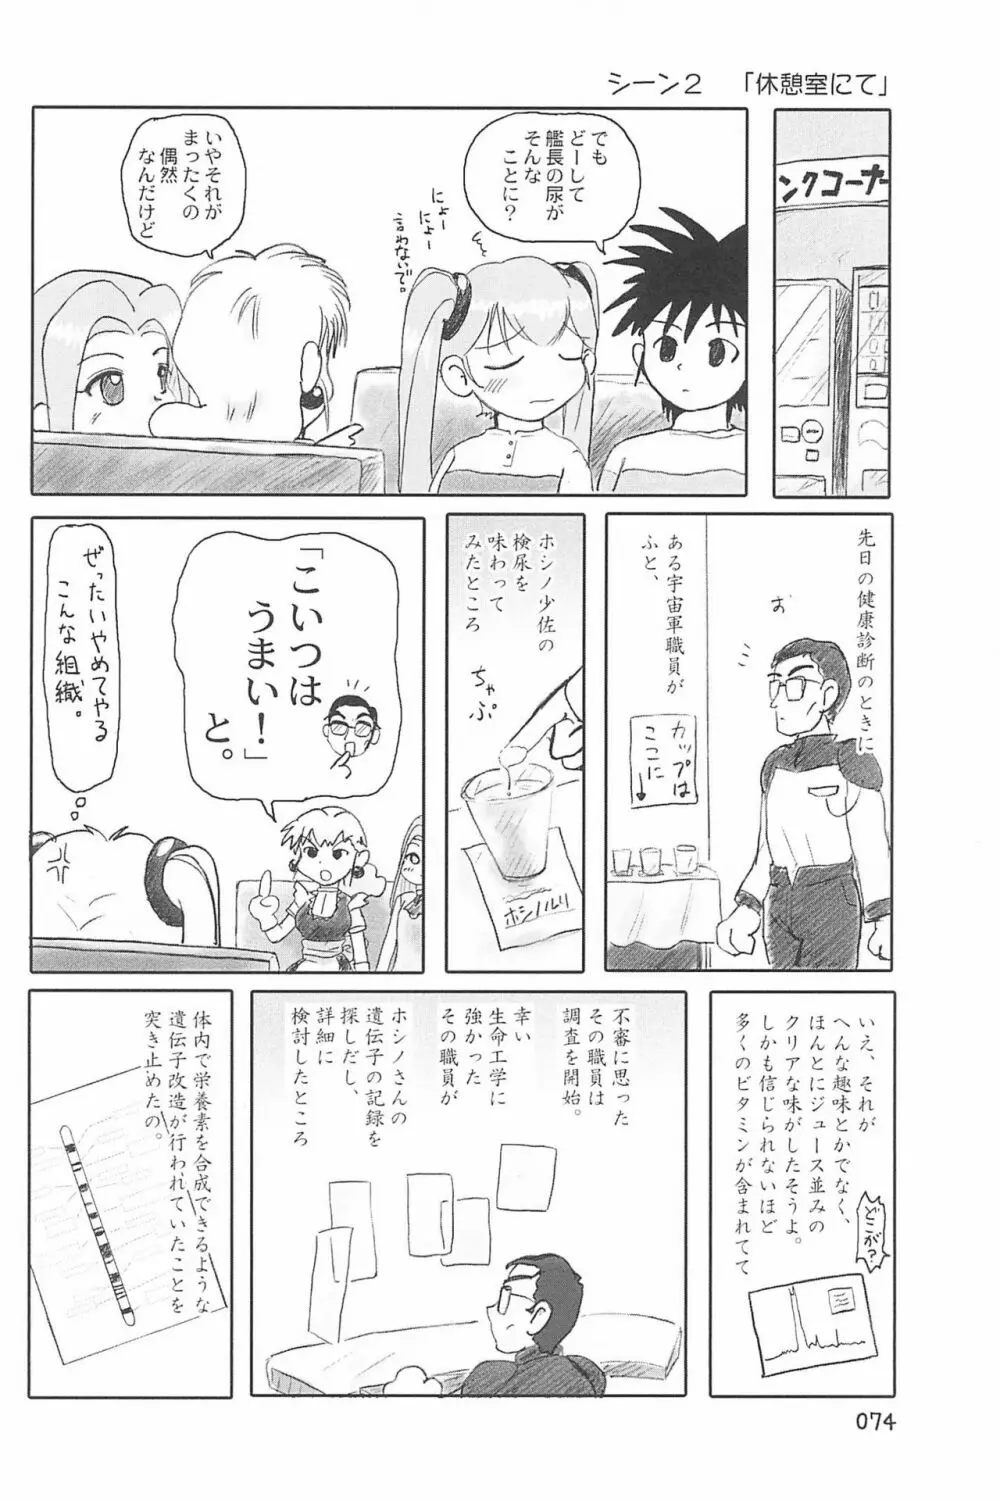 ND-special Volume 4 74ページ